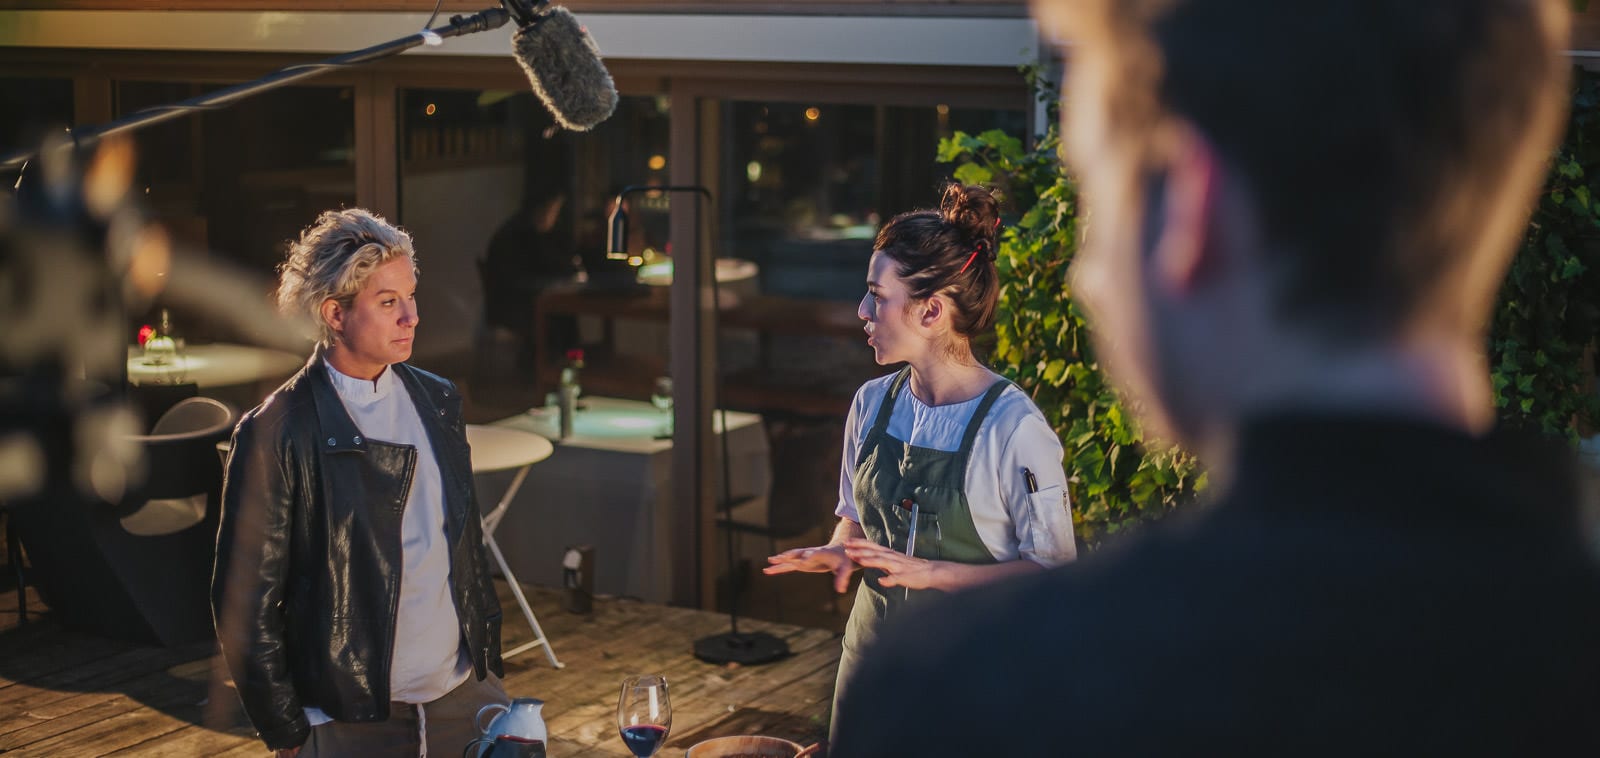 Squareme Mastercard Sous Chef campaign for Michelin star winners in Slovenia - Award winning chef Ana Roš and her assistant are talking about food on her garden patio while a film crew is filming them